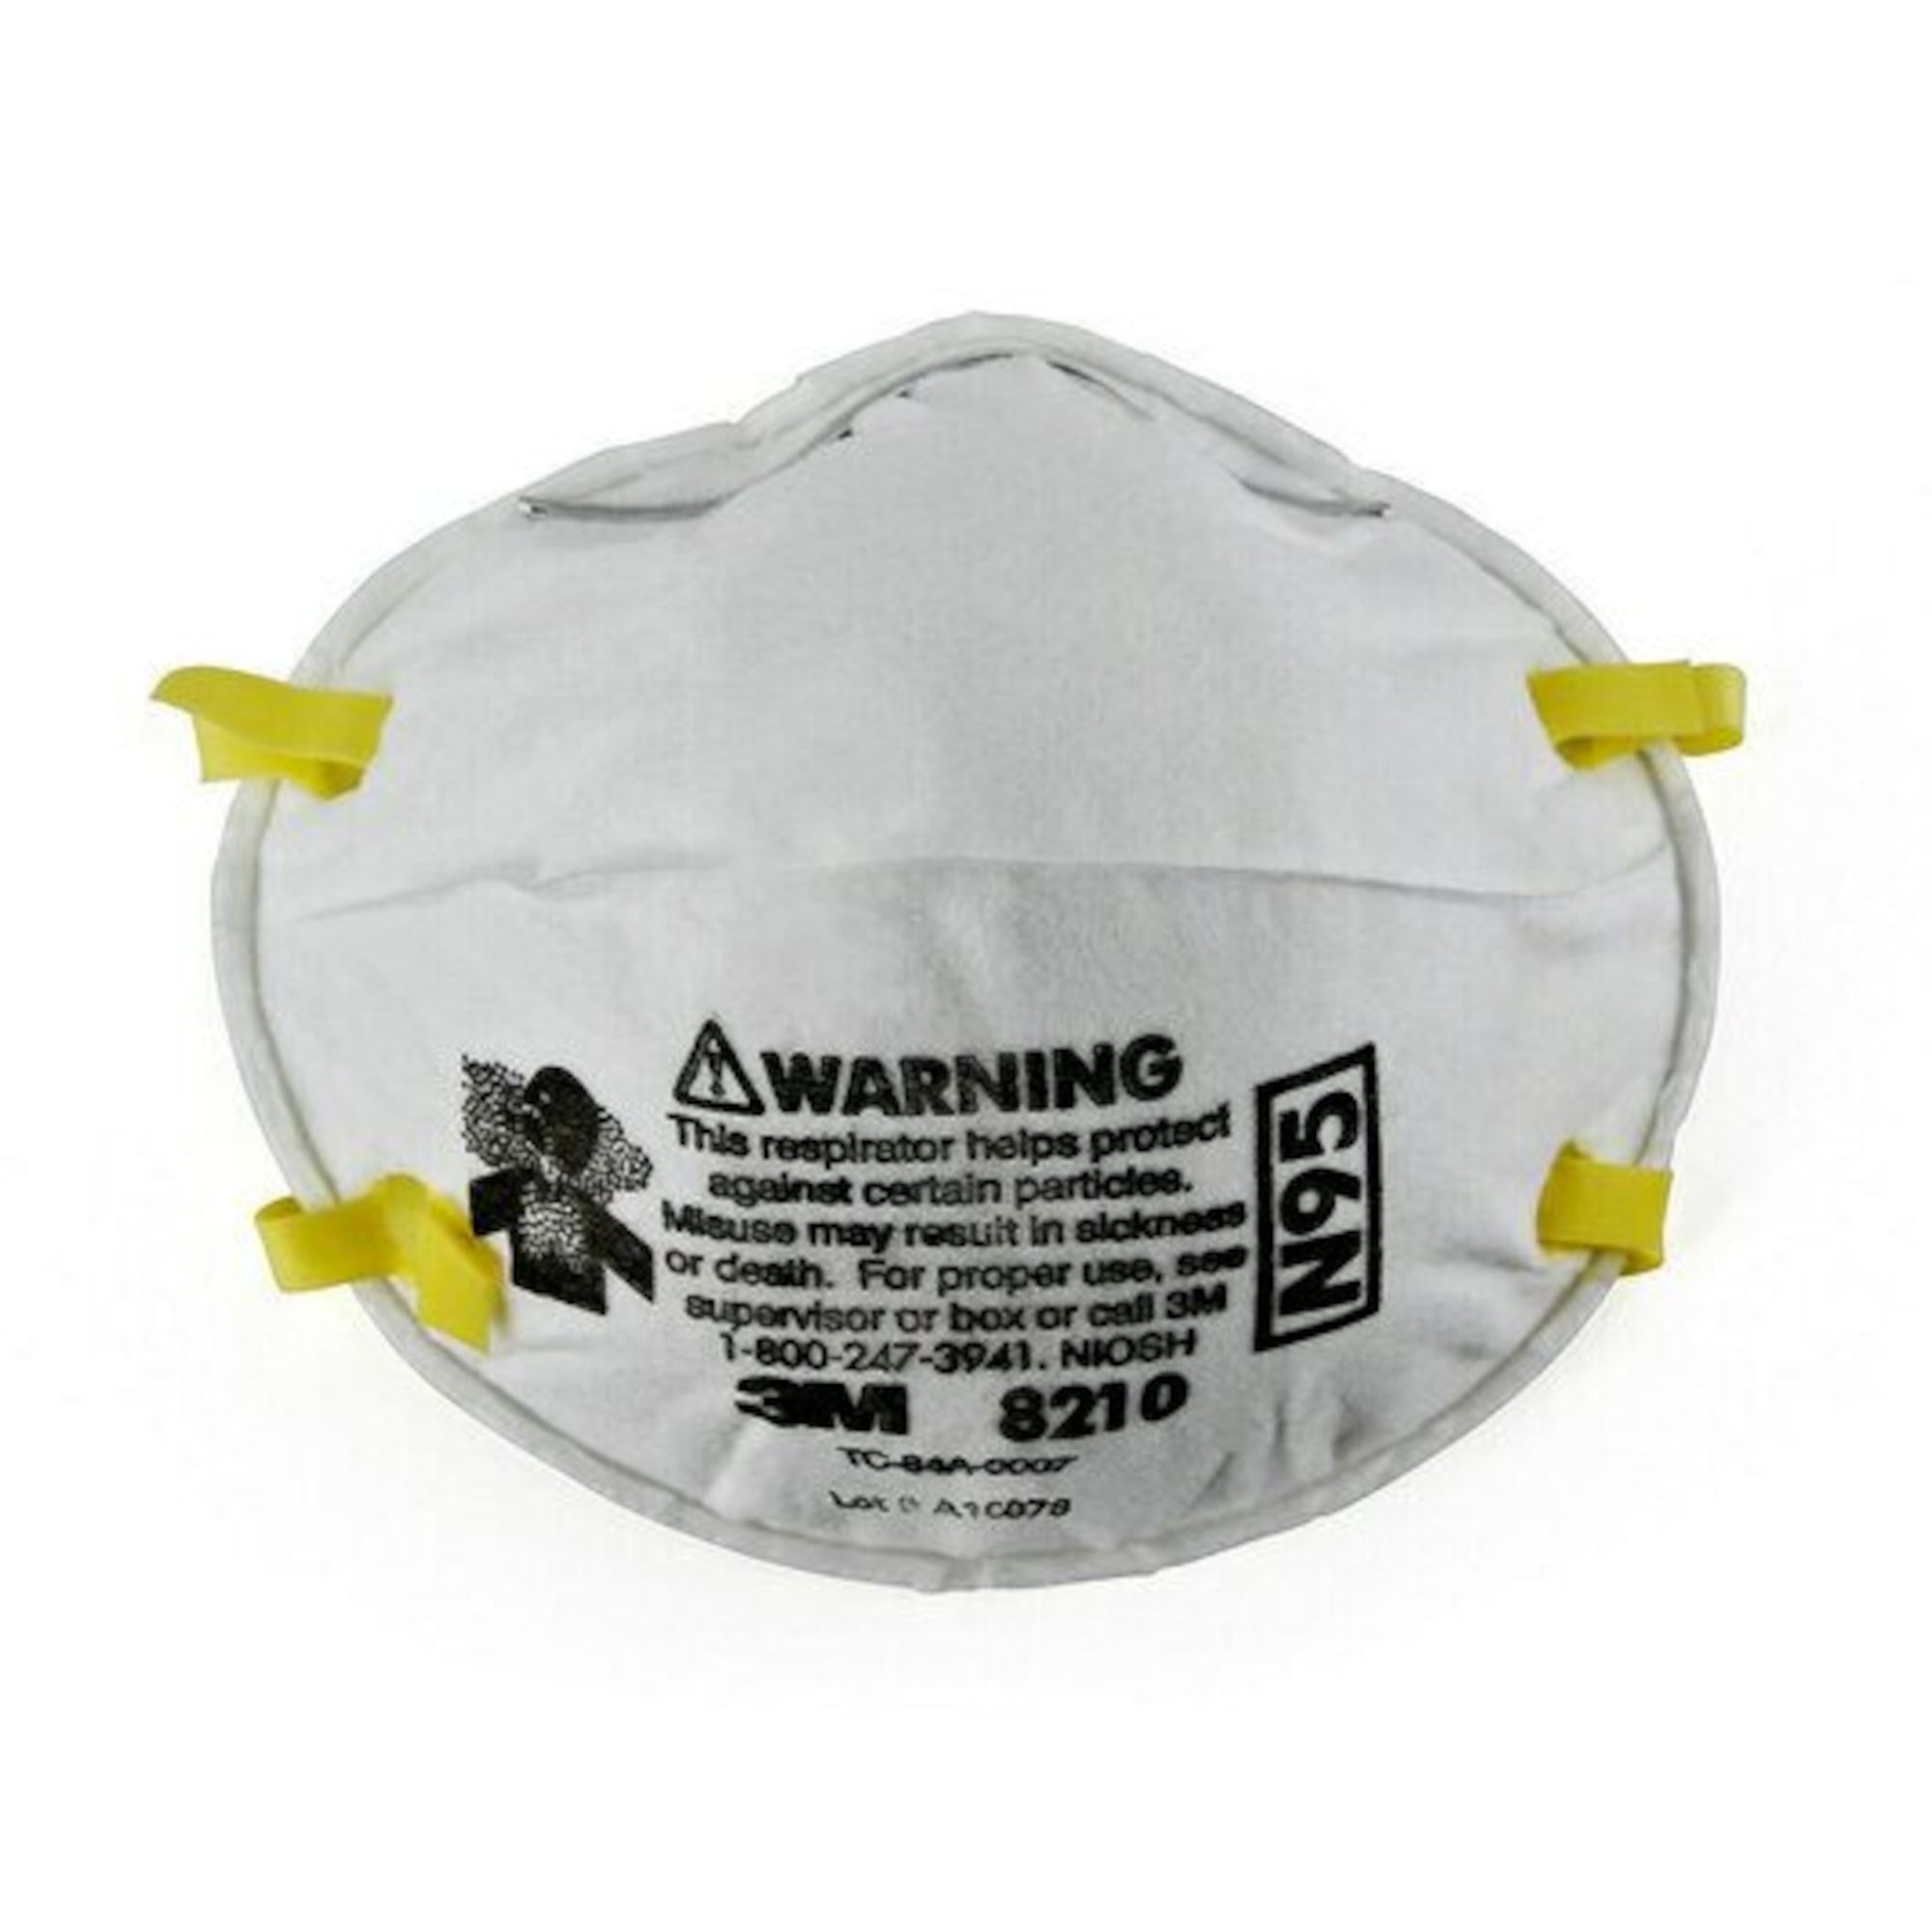 3M Particulate Respirator 8210 N95 Mask